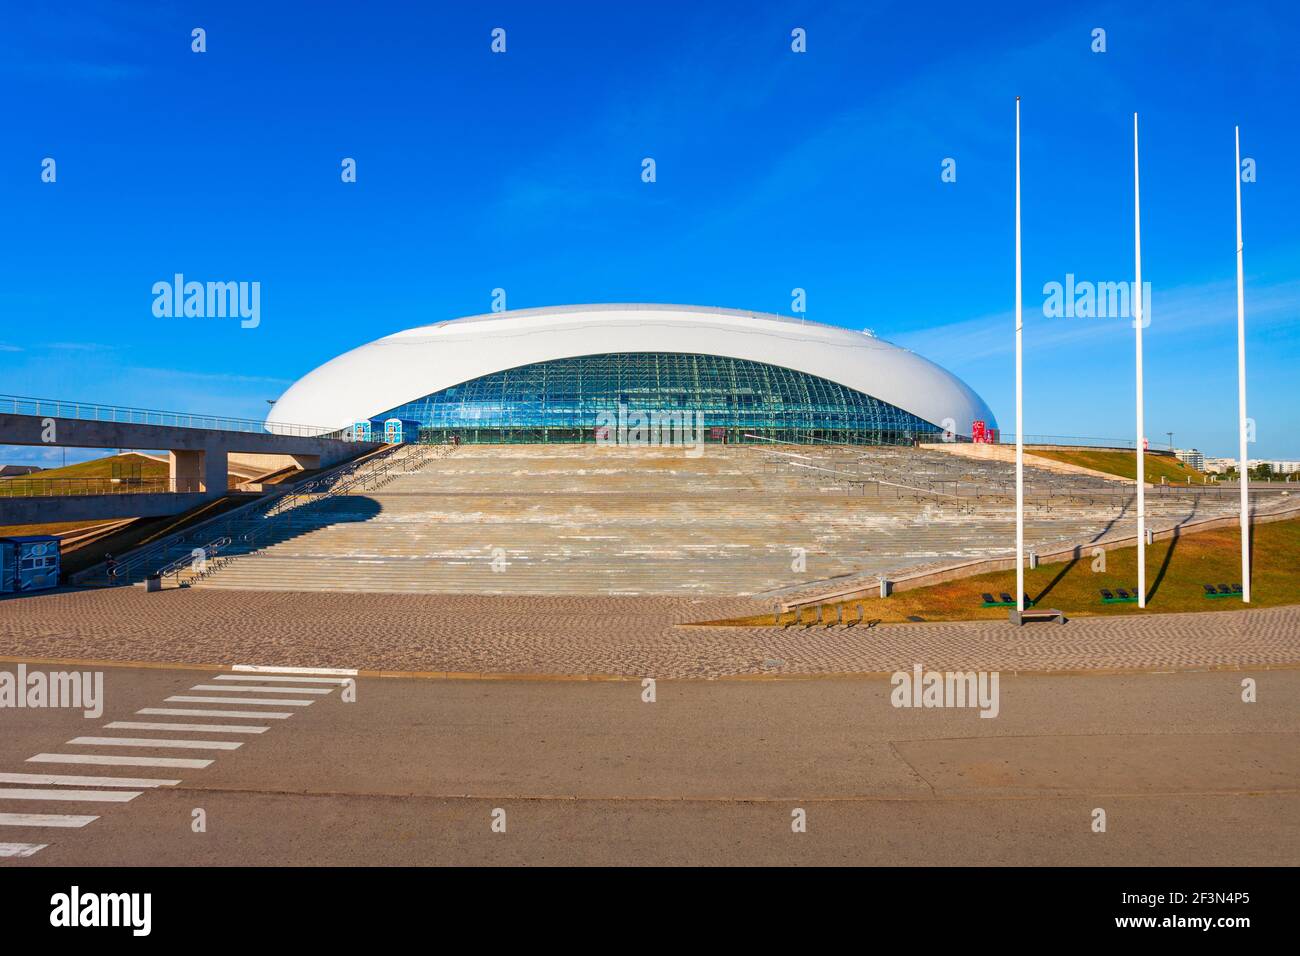 Sochi, Russia - October 04, 2020: Bolshoy Ice Dome at Sochi Olympic Park, which was constructed for 2014 Winter Olympic Games. Stock Photo